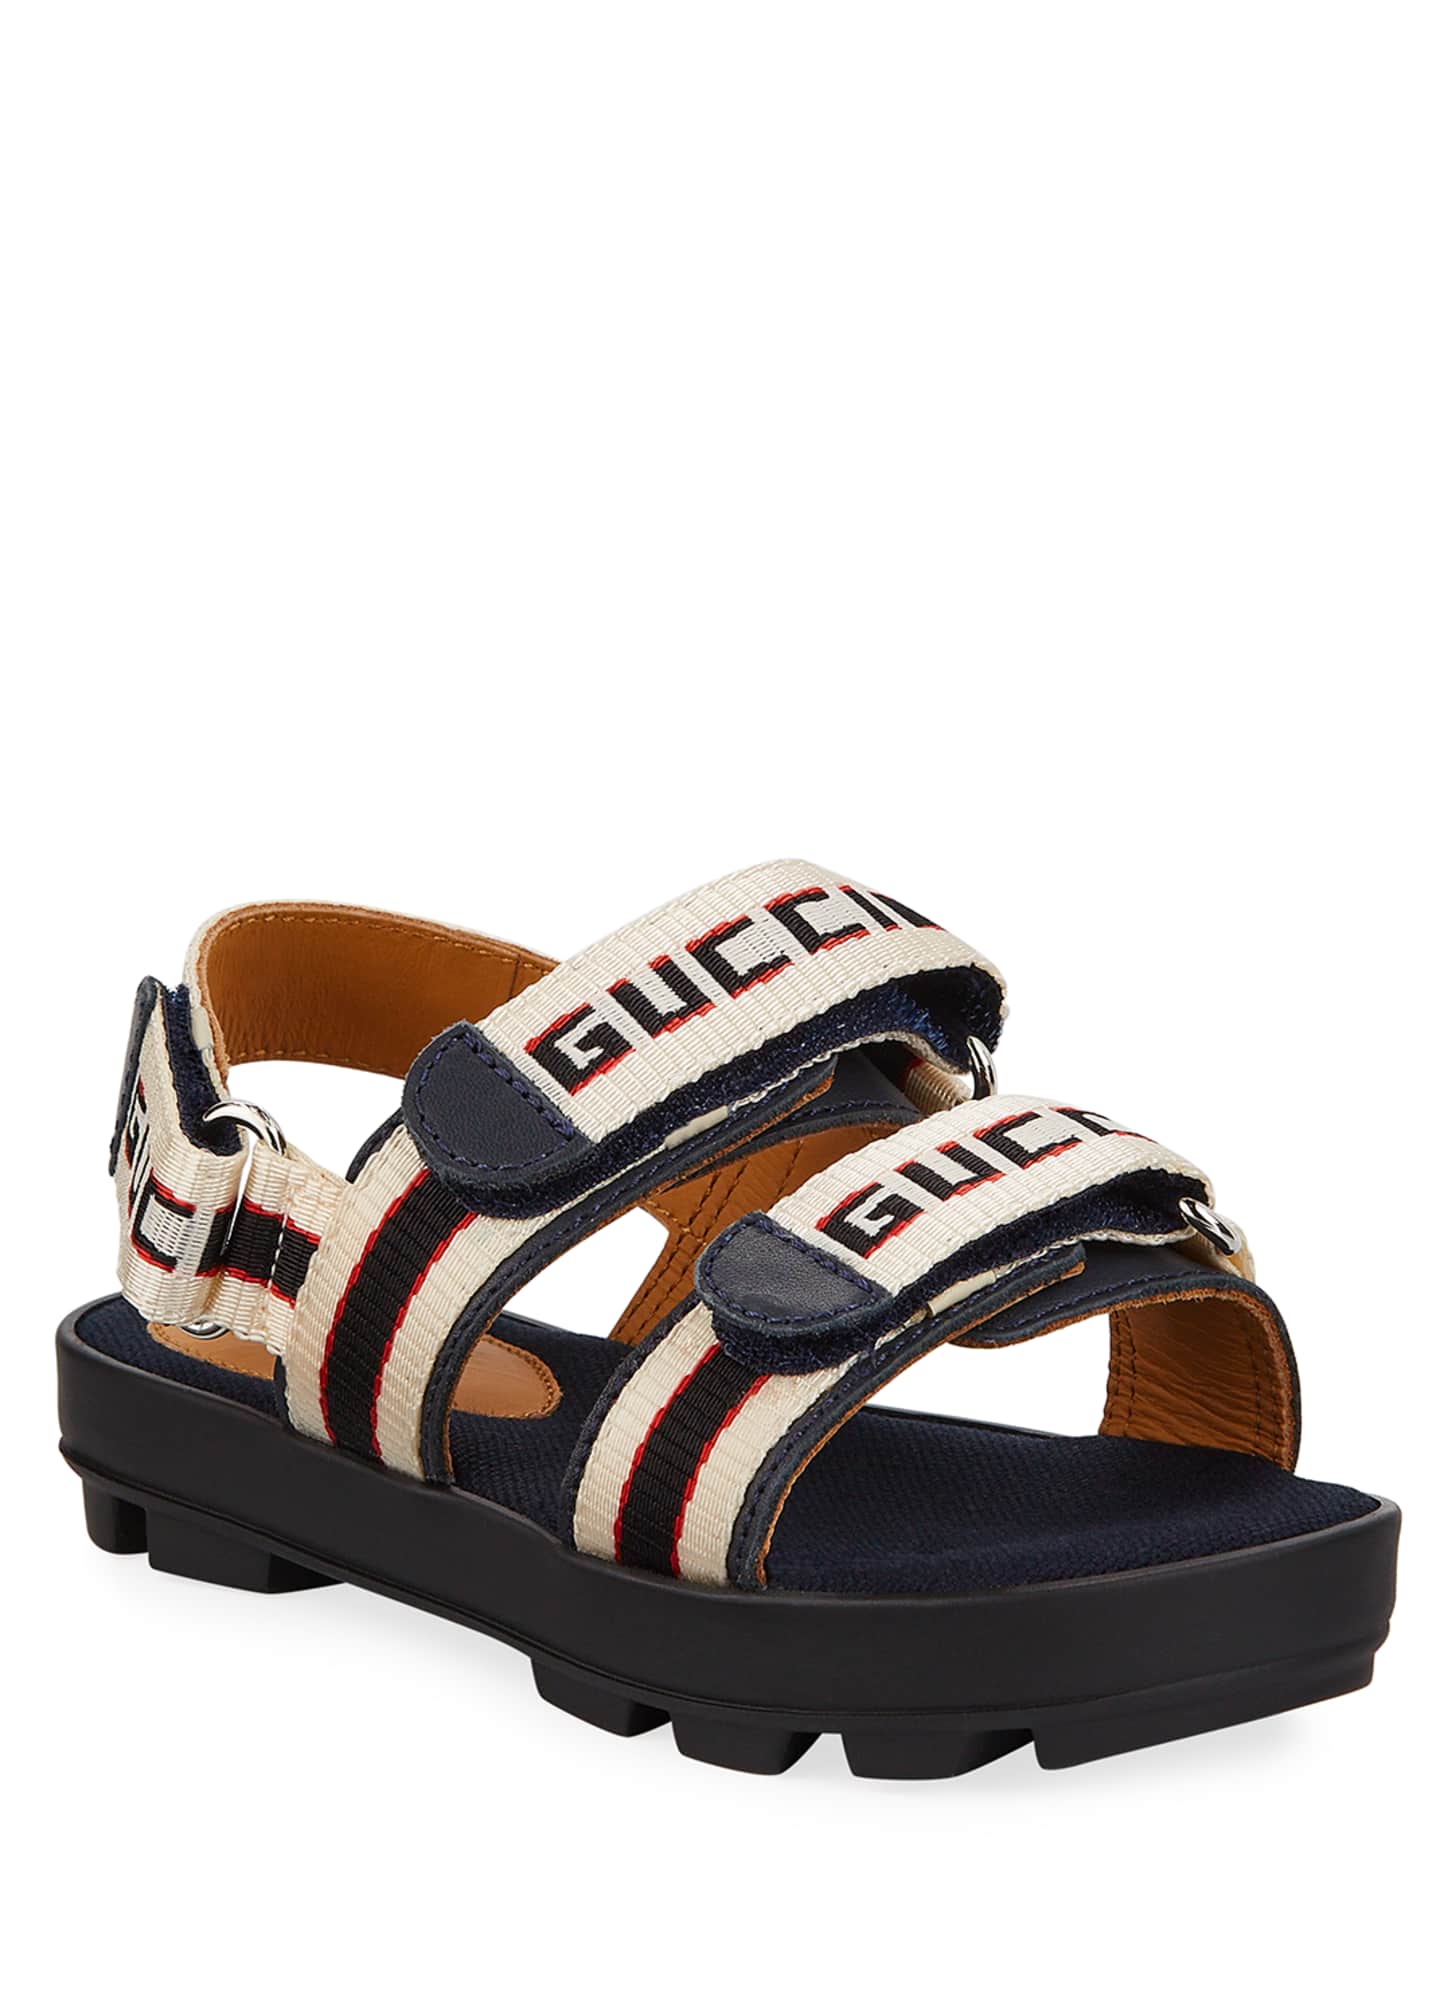 gucci sandals for toddlers